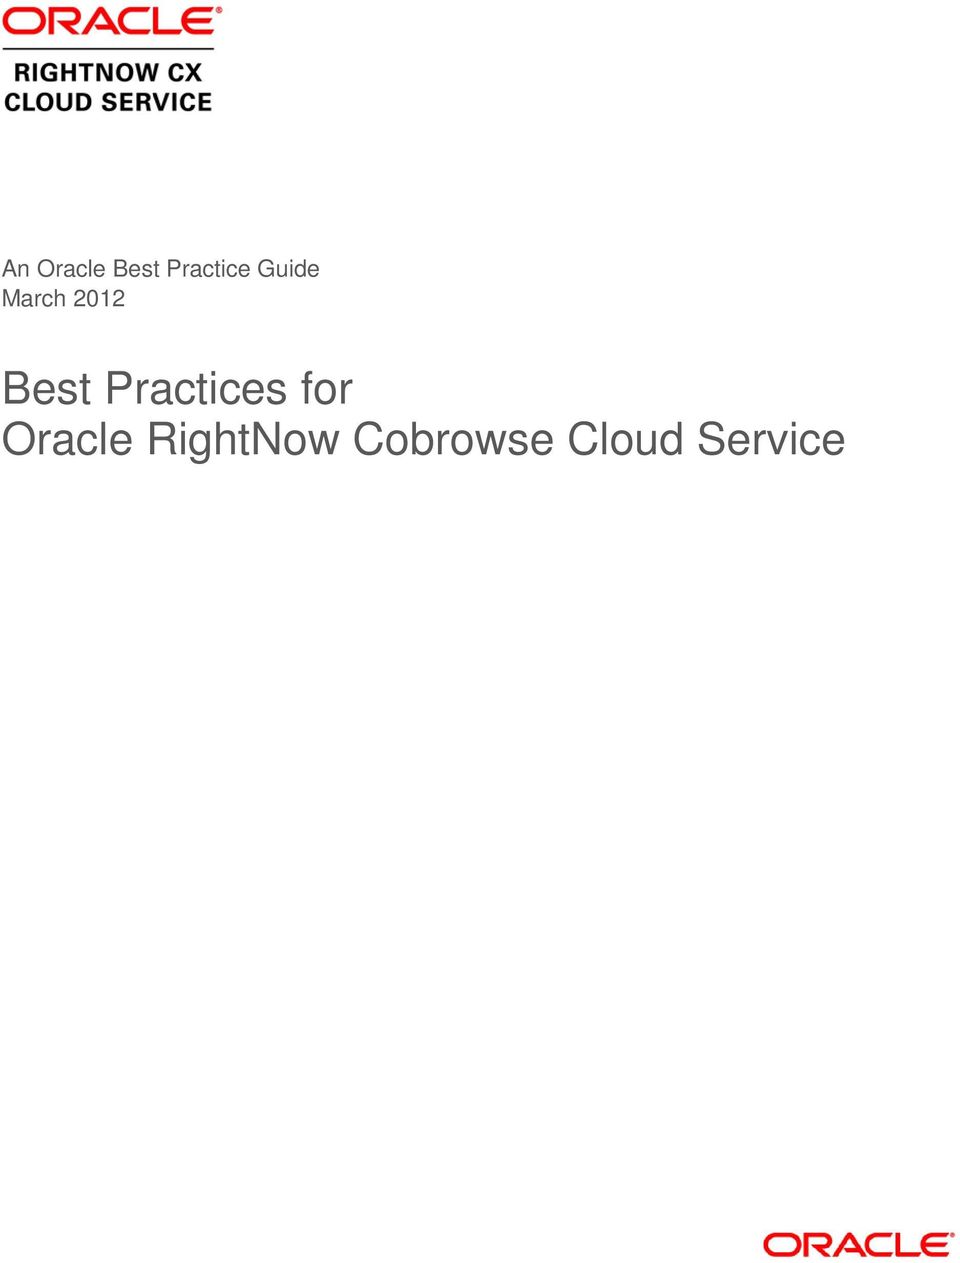 Practices for Oracle